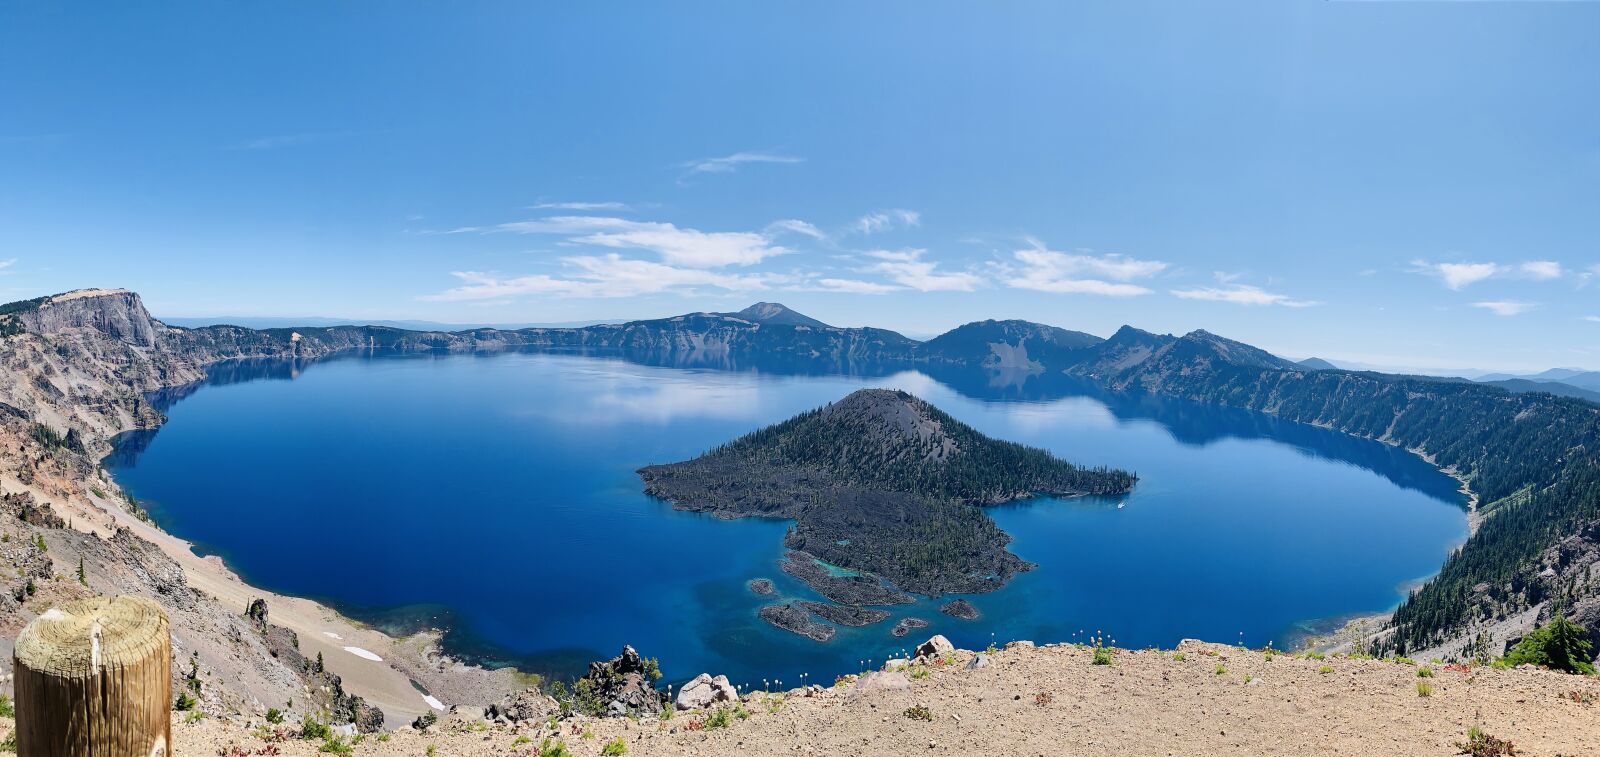 Apple iPhone XS + iPhone XS back camera 4.25mm f/1.8 sample photo. Crater lake national park photography